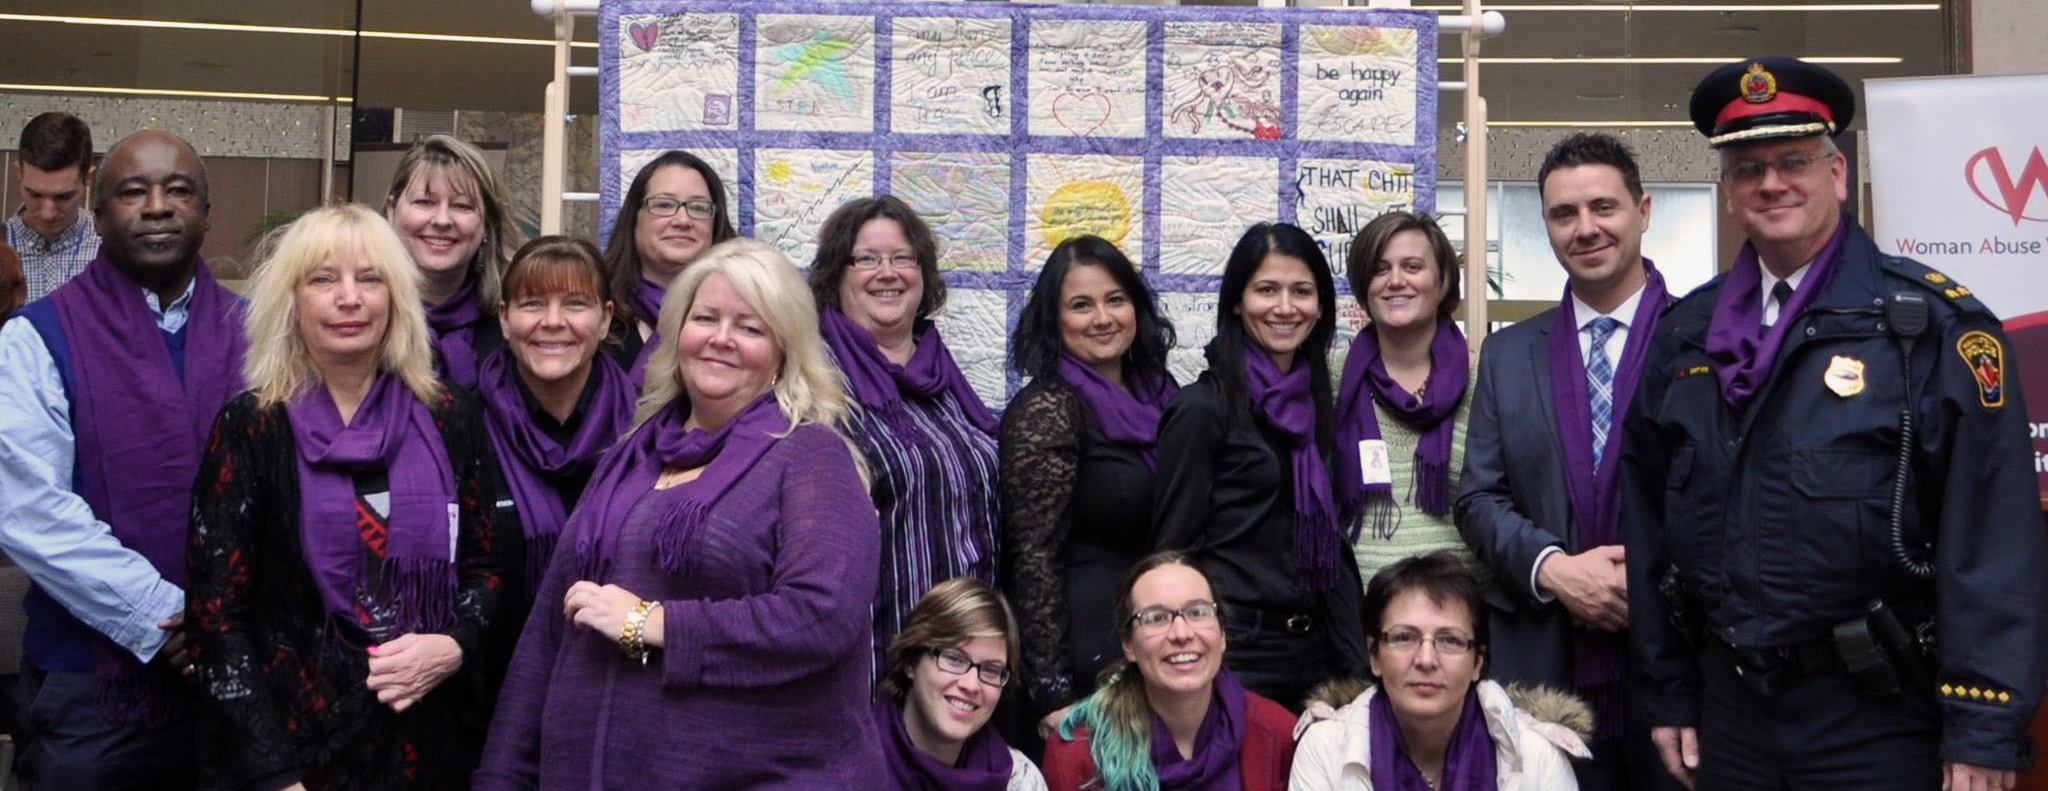 Image of the Woman Abuse Working Group members. They are all wearing the purple scarves to show their support for abused woman and children across Canada